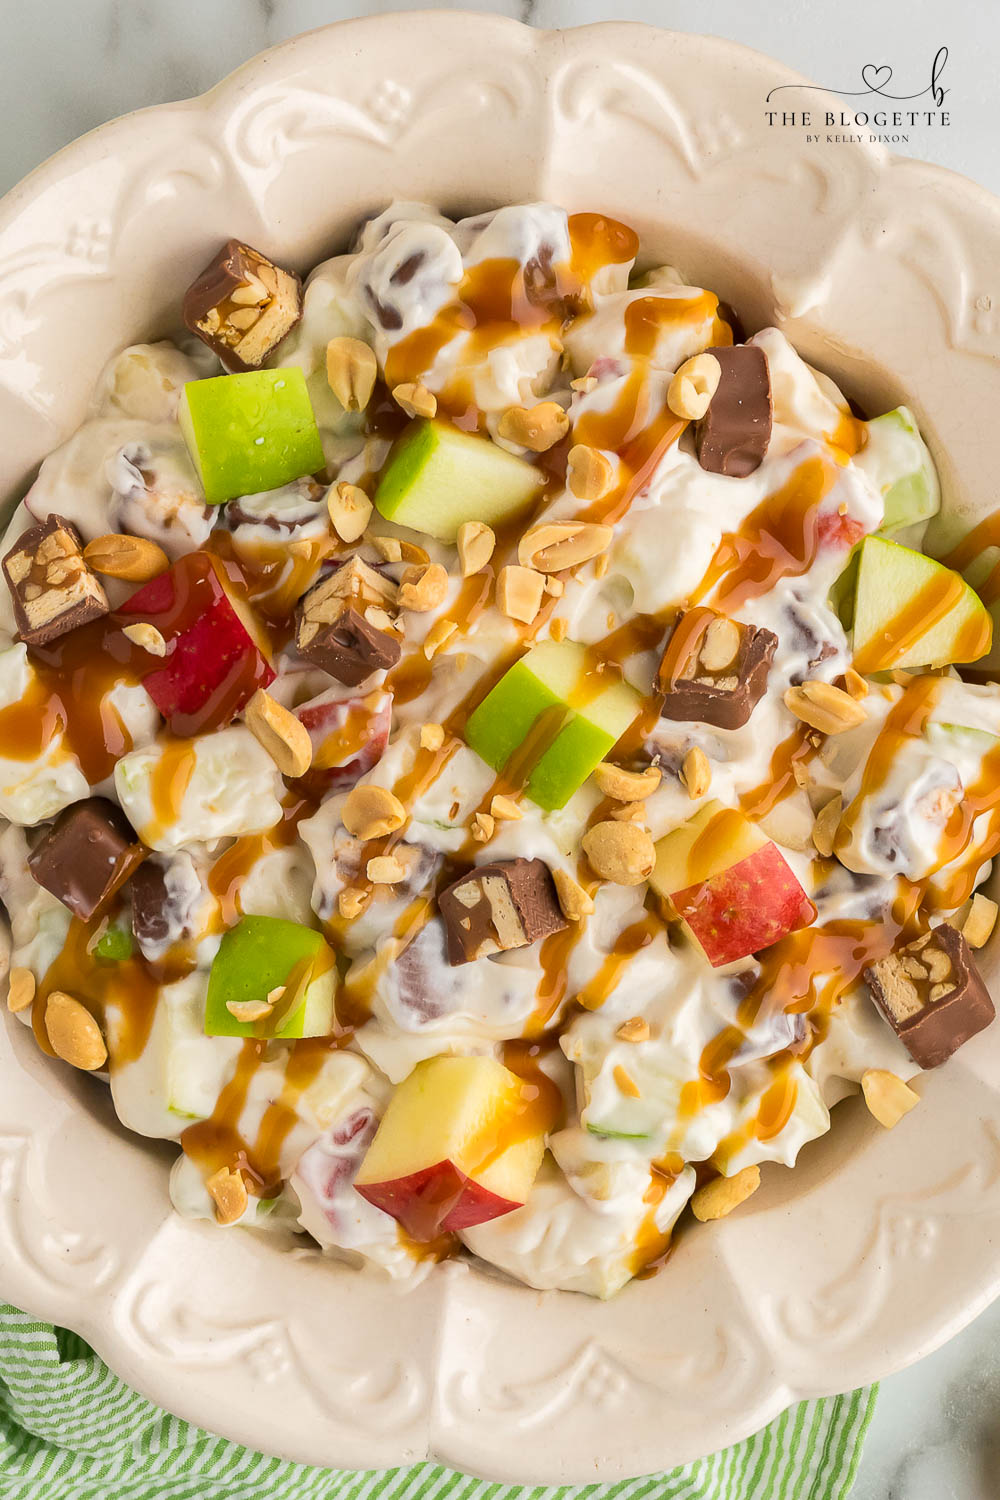 Snickers Apple Salad is a delightful dessert with a combination of apples and Snickers bars in a creamy white chocolate whipped cream sauce.